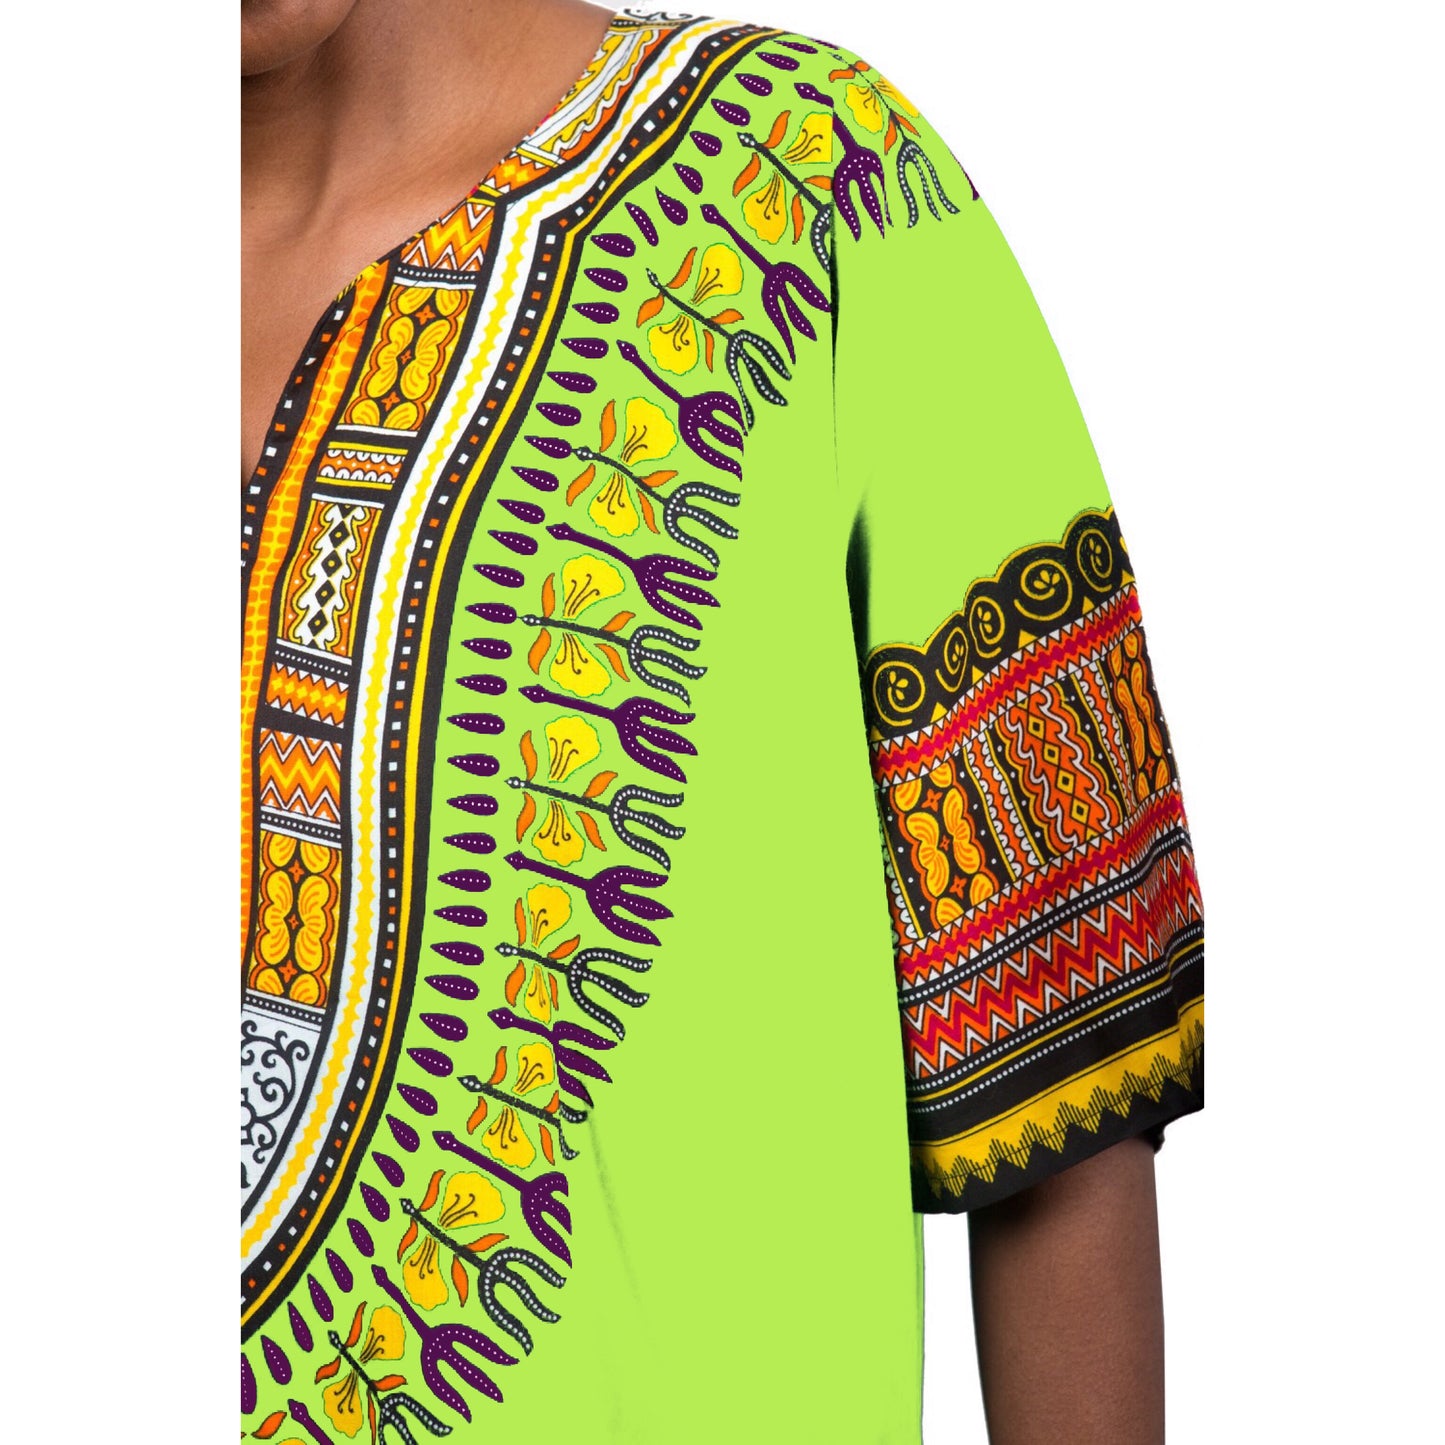 The "One Love For All Humanity"  REAL QUALITY Dashiki Sets (All Styles)